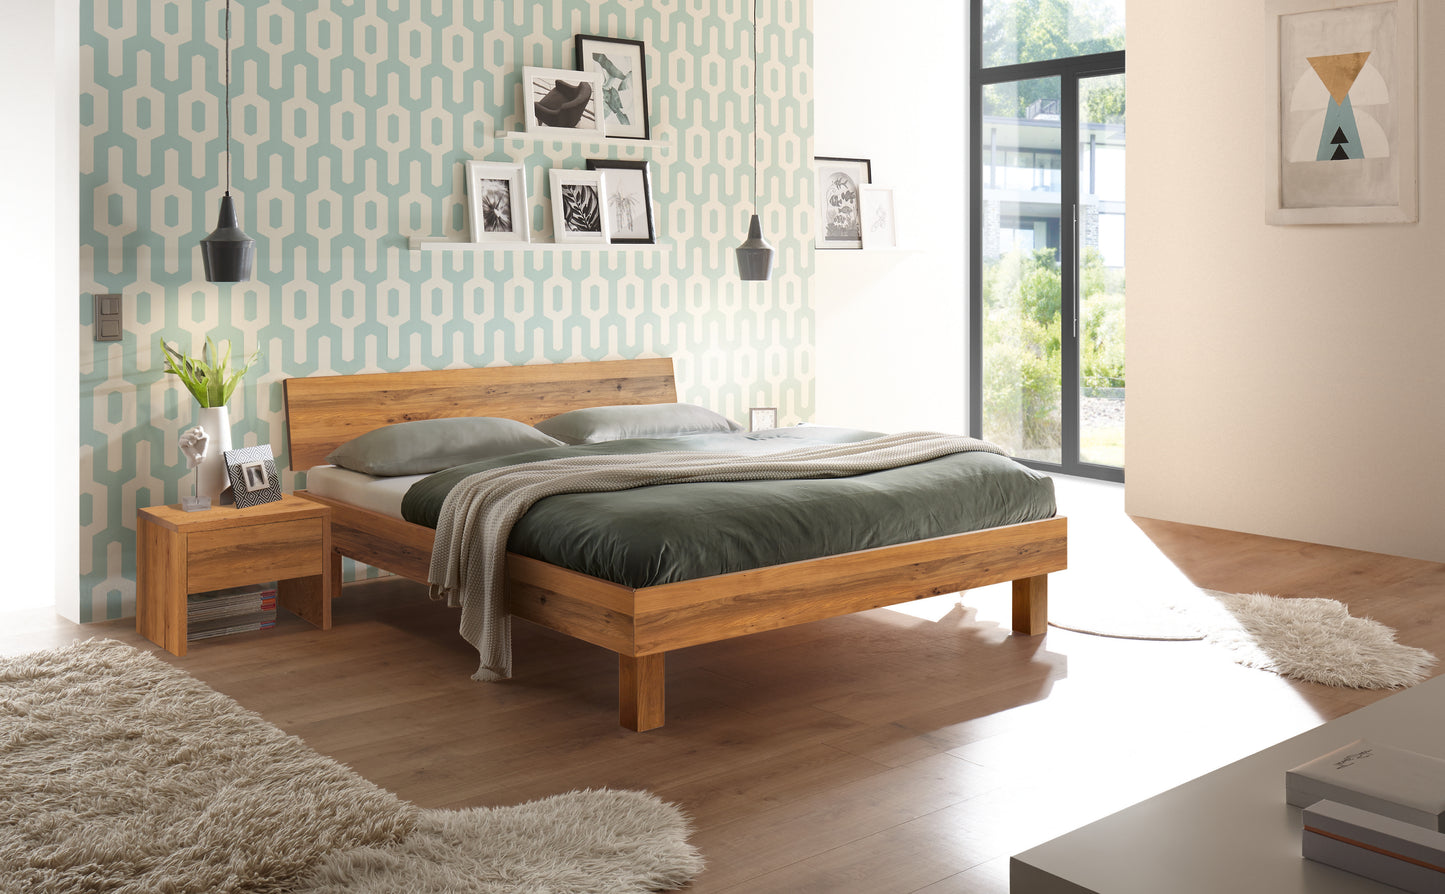 Tunca Wooden Bed Frame Different Types Of Wood Including Slatted Base